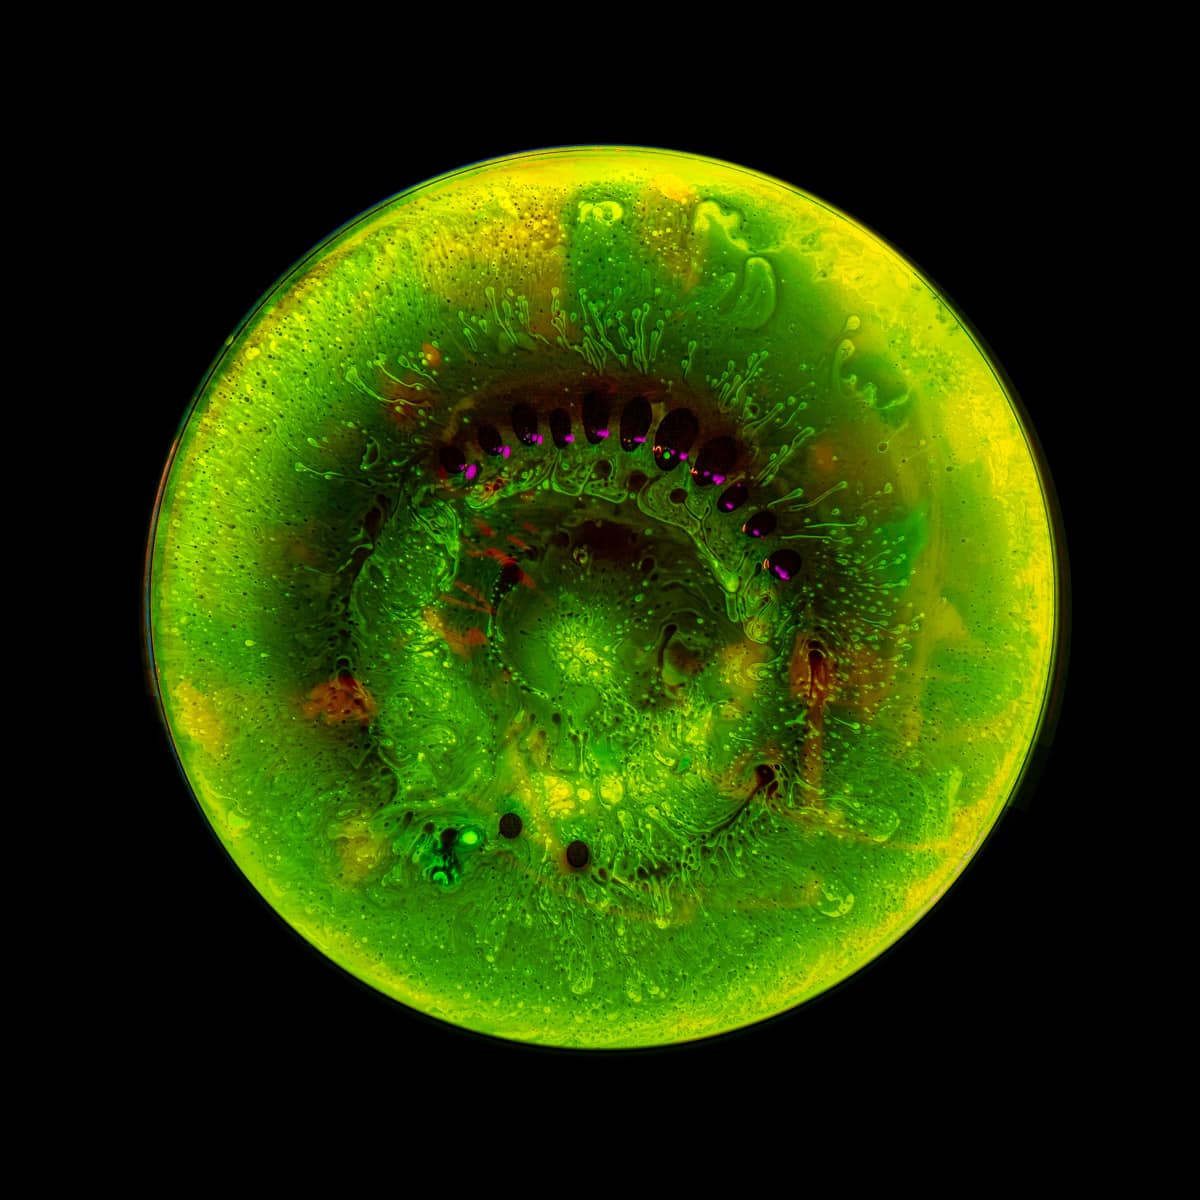 Ferro-magnetic fluid in a petrie dish with fluorescein, acrylic paint, and glycerine.